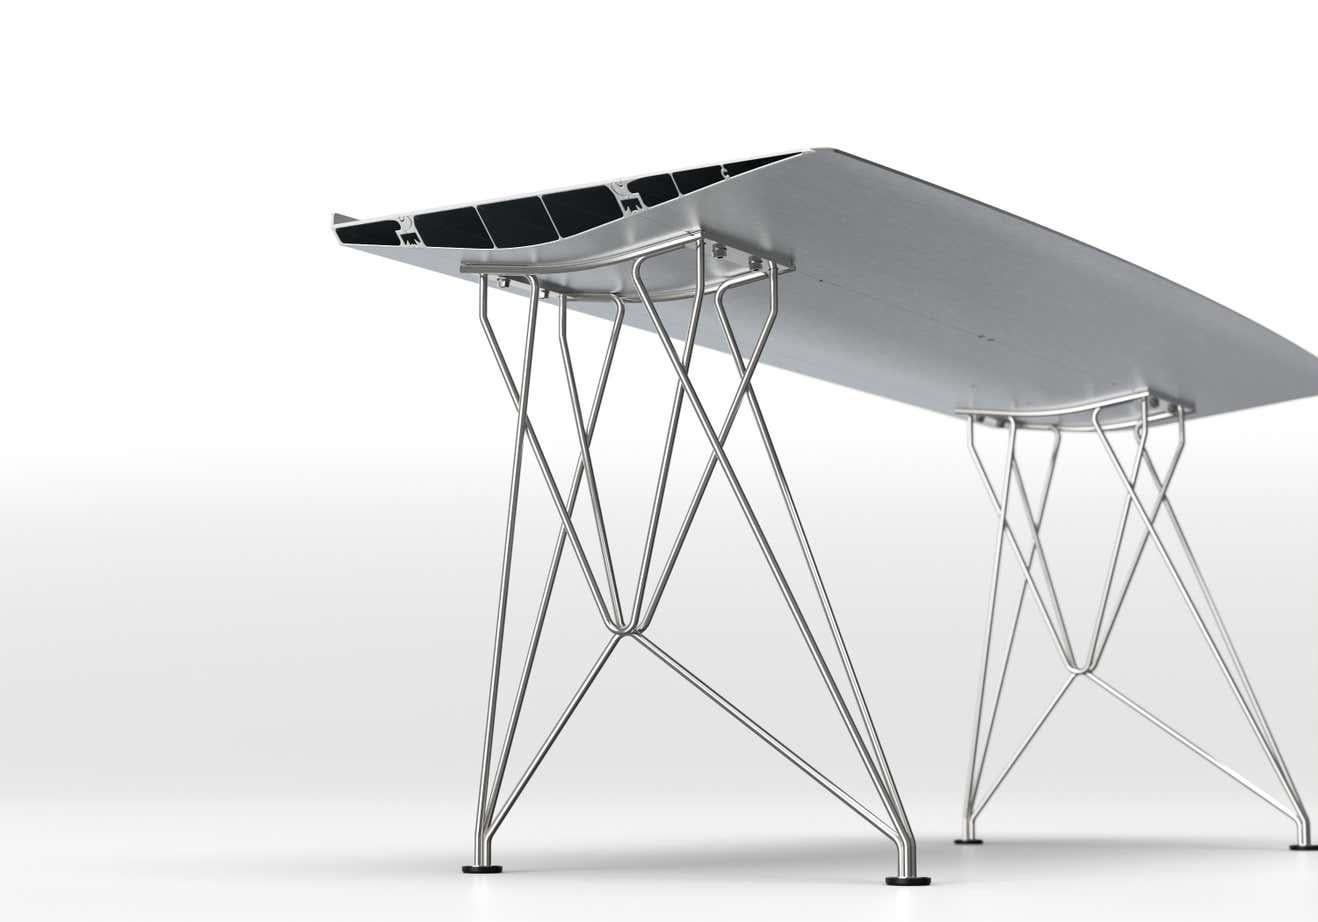 21stCentury Table B Desk Konstantin Grcic Top Anodized Silver with Inox Legs

Materials: 
Aluminium, stainless steel

Dimensions: 
D 70 cm x W 180 cm x H 74 cm

The Table B, which inaugurated the Extrusions Collection in 2009, can reach up